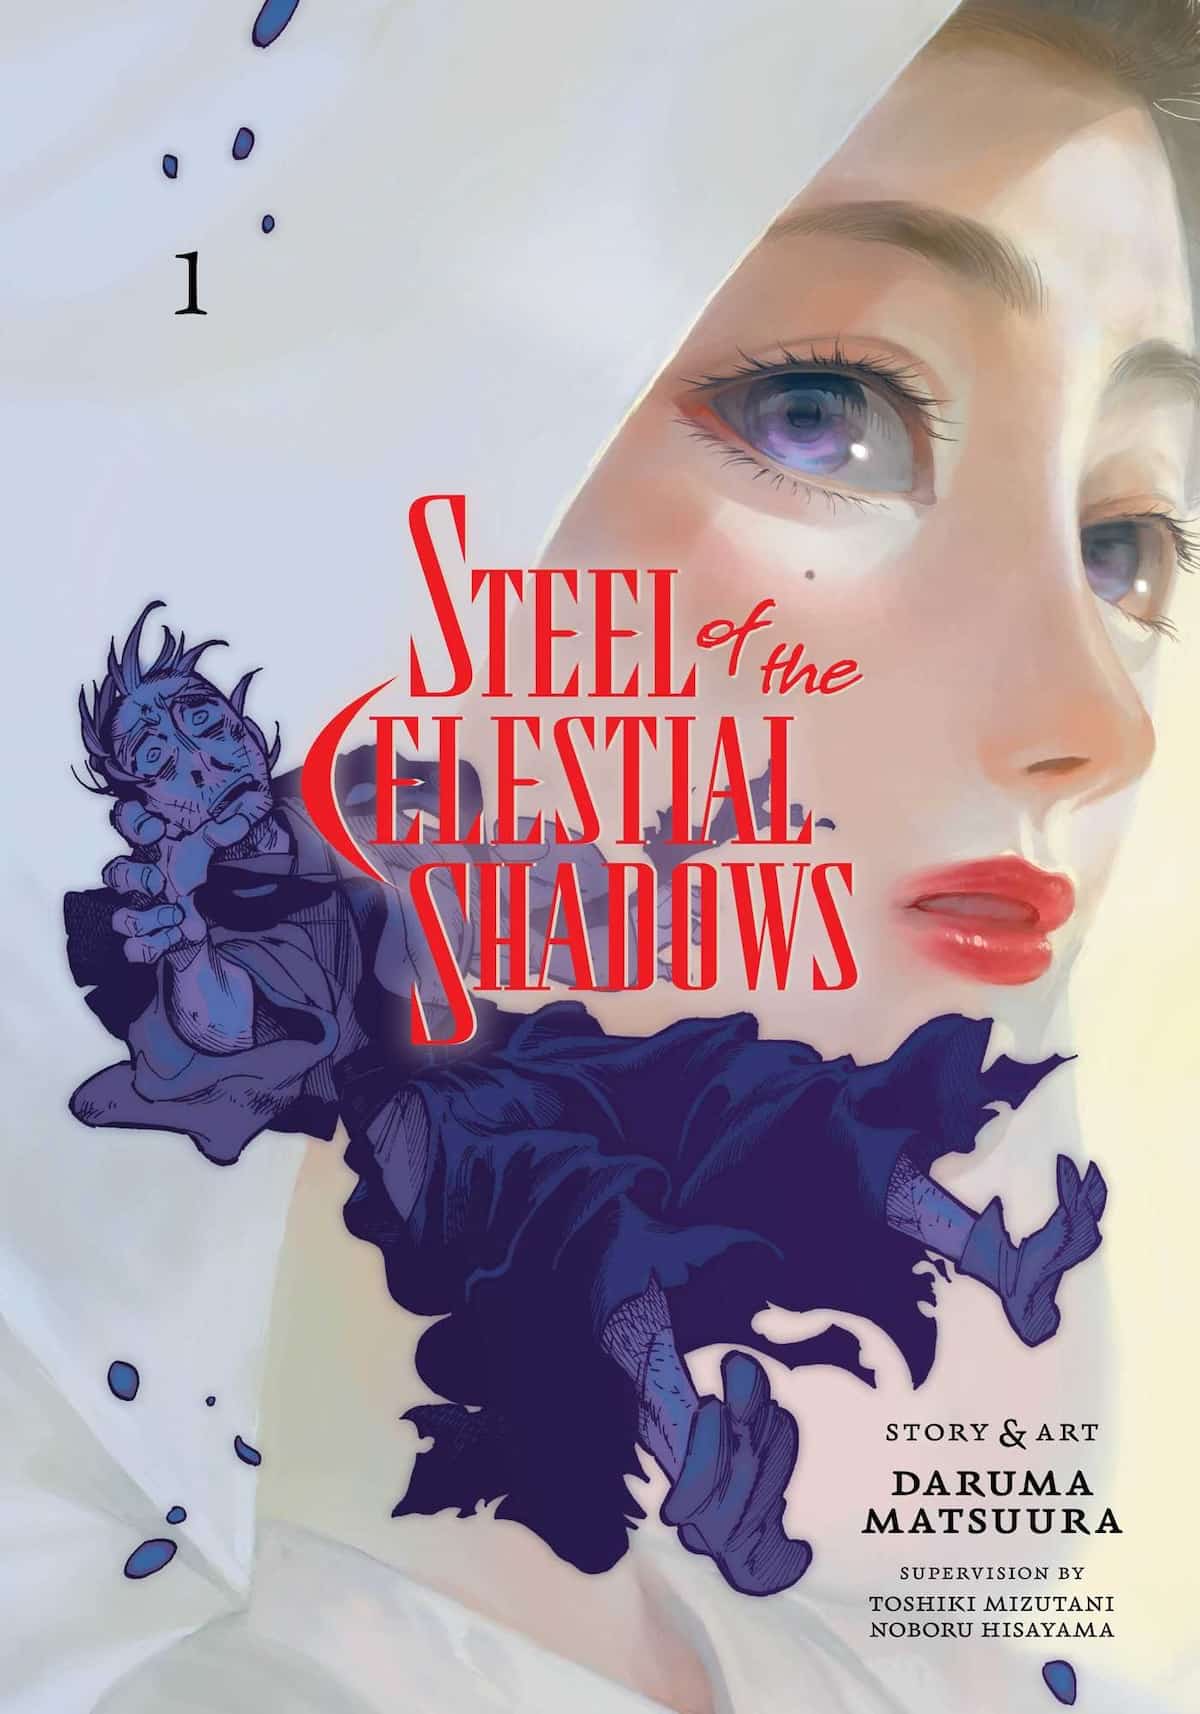 The cover to Steel of the Celestial Shadows Volume 1. It depicts a painted image of Tsukidono as Ryudo, in purple, seemingly falls to his doom.